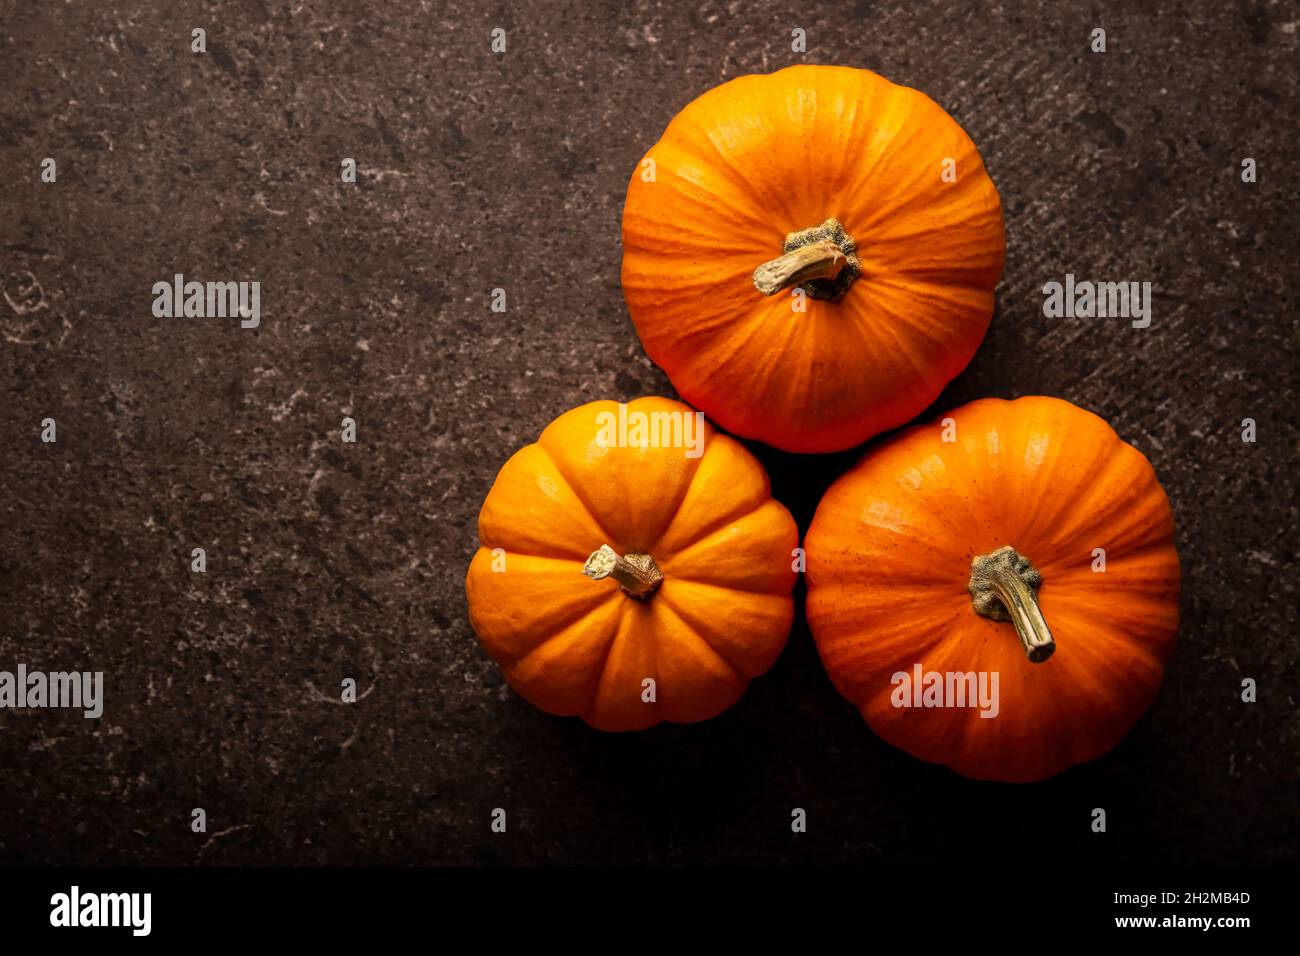 Top view of orange pumpkins with copy space. Pumpkins are widely grown for commercial use and as food, aesthetics, and recreational purposes. Much con Stock Photo